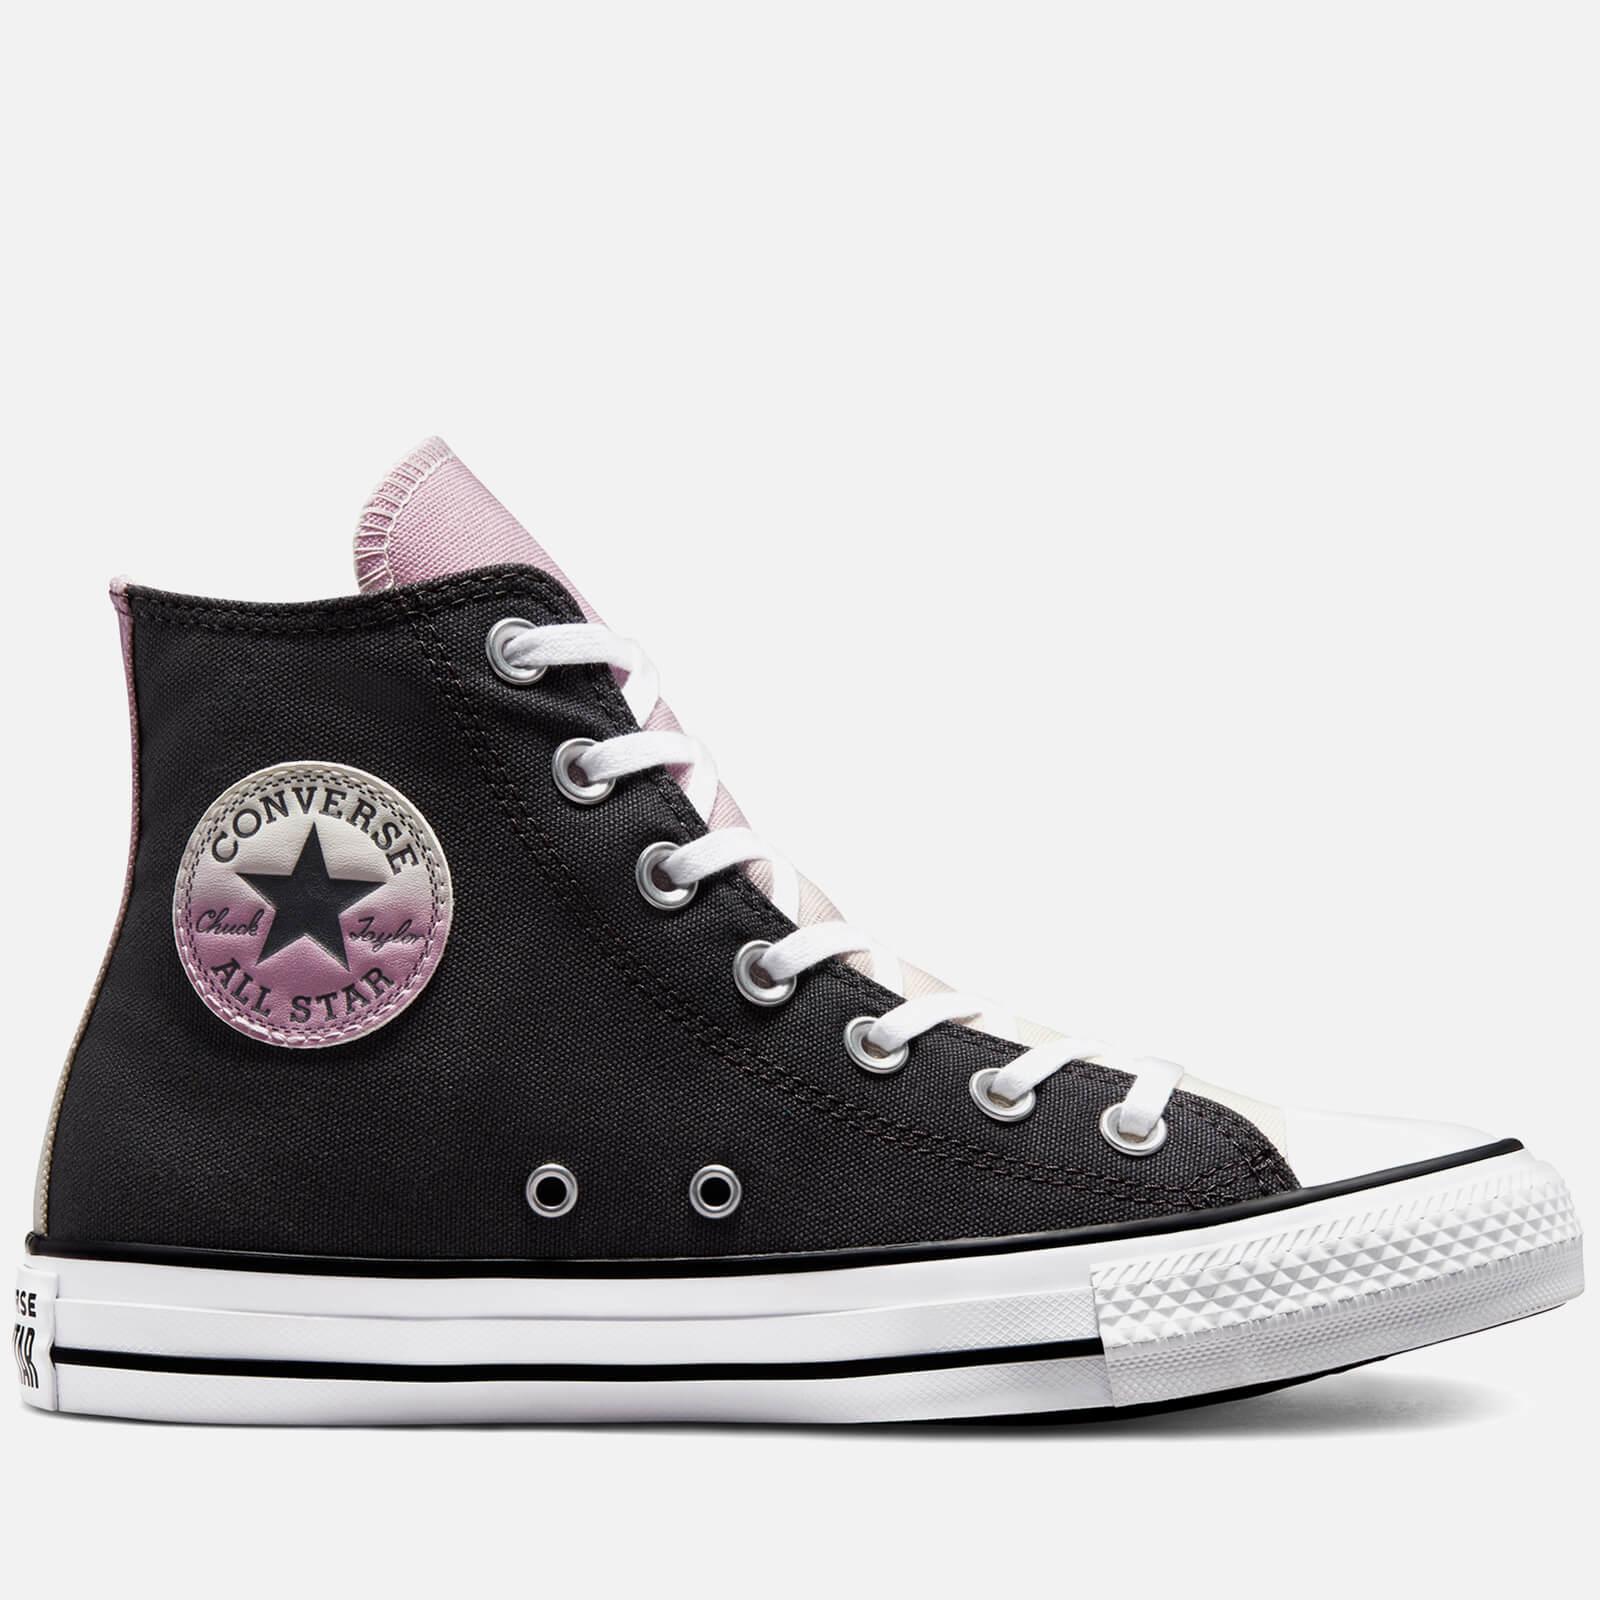 Converse Canvas Chuck Taylor All Star Ombré Hi-top Trainers in Black | Lyst